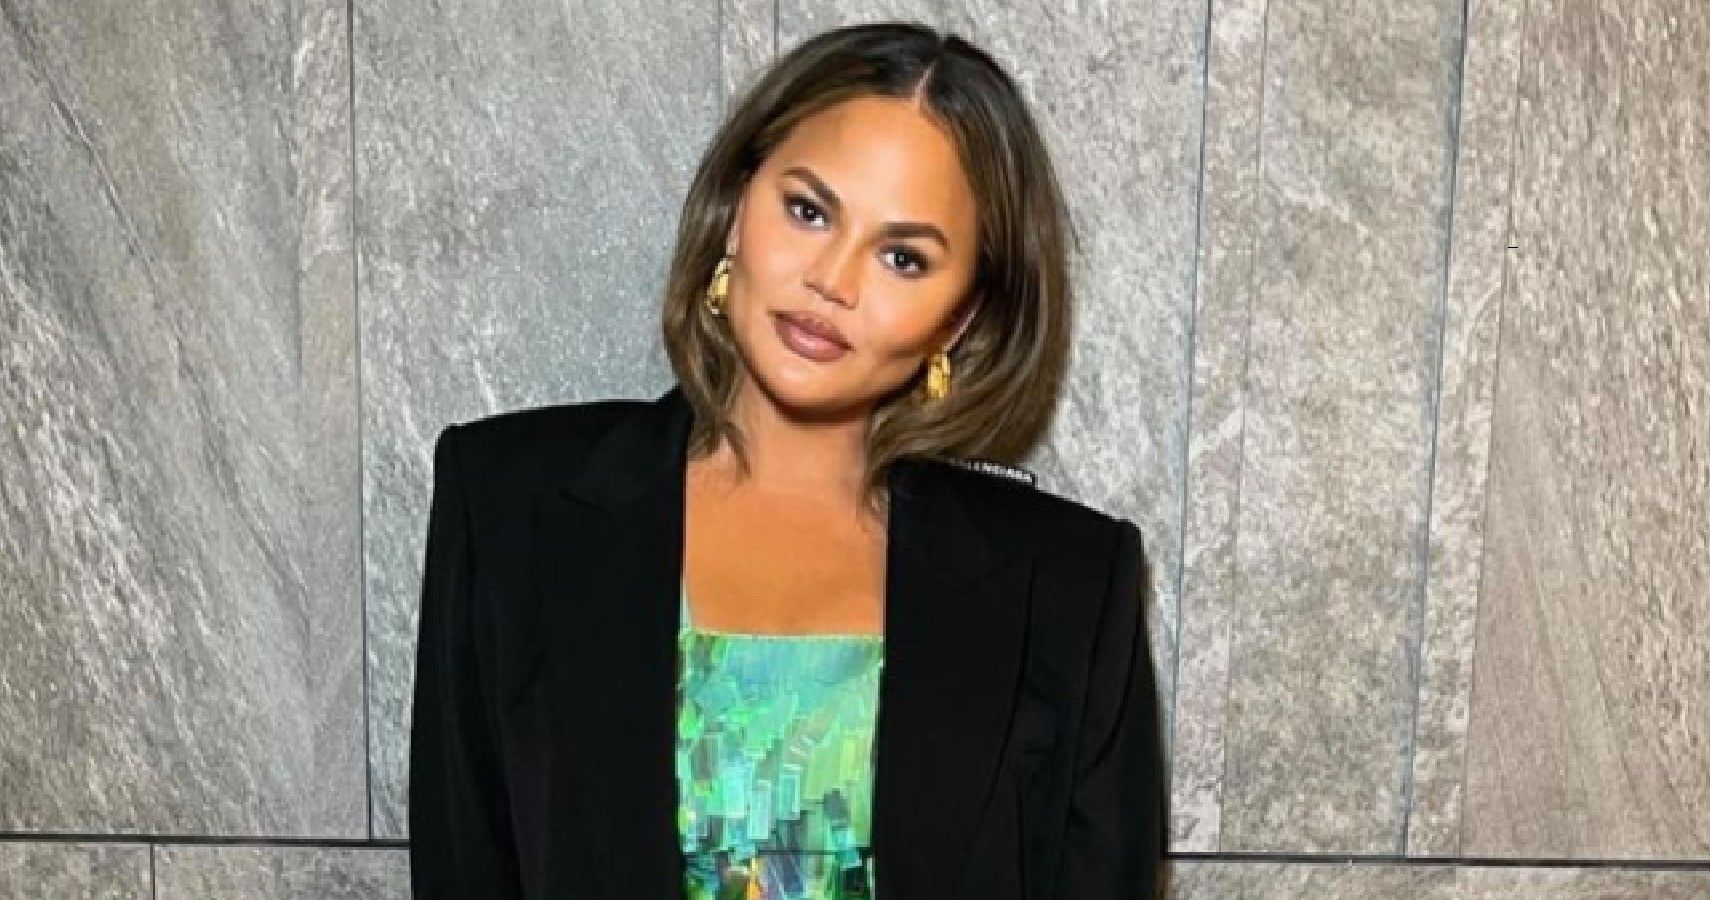 Why Chrissy Teigen Says She's 'Full Of Regret' After Pregnancy Loss